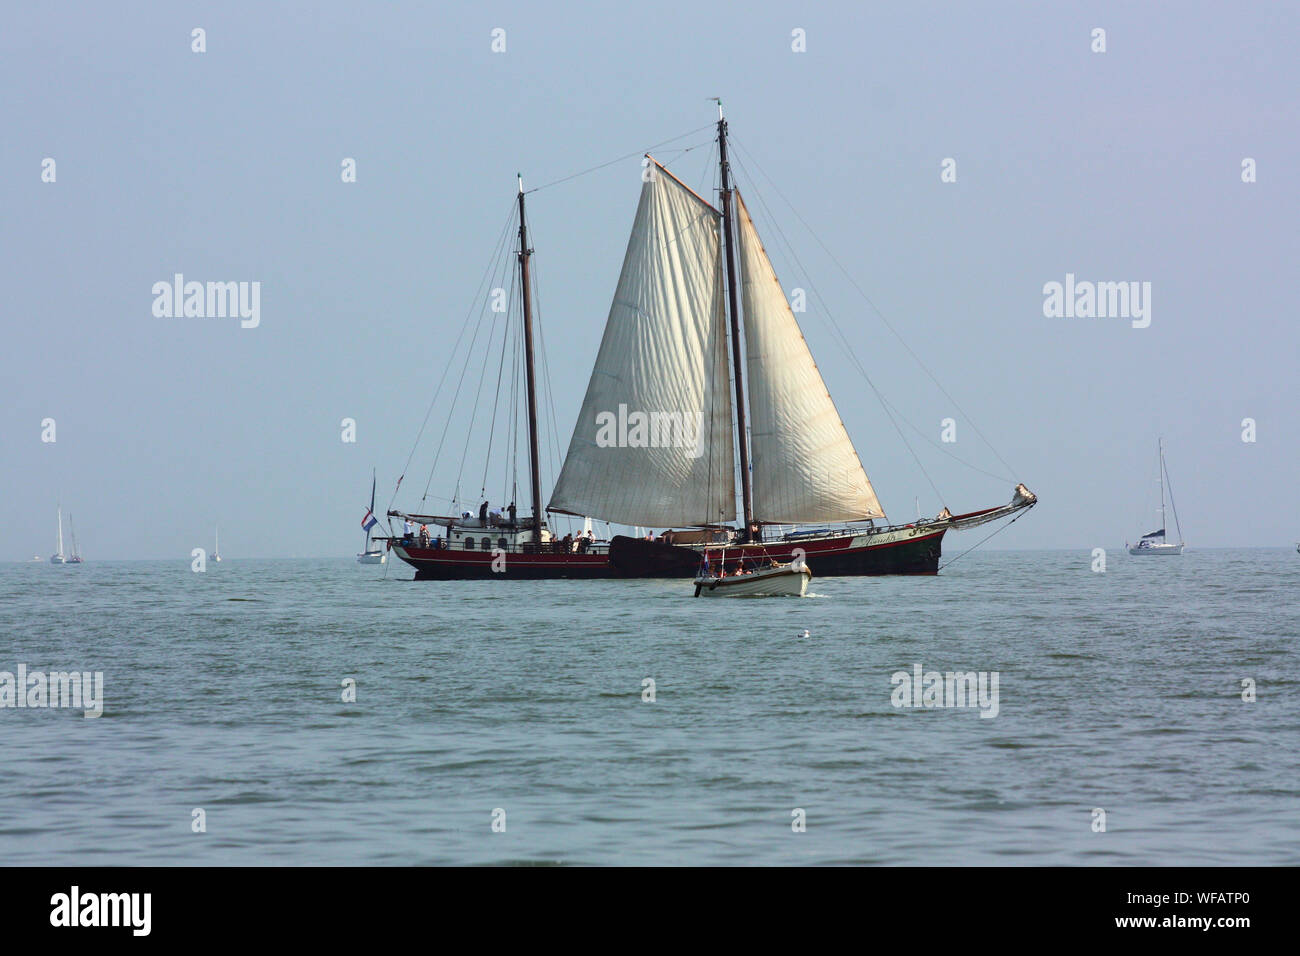 The beautiful scenery of traditional fisherman sailing ship when it is seen over the sea on Volendam waters in the summer. Stock Photo